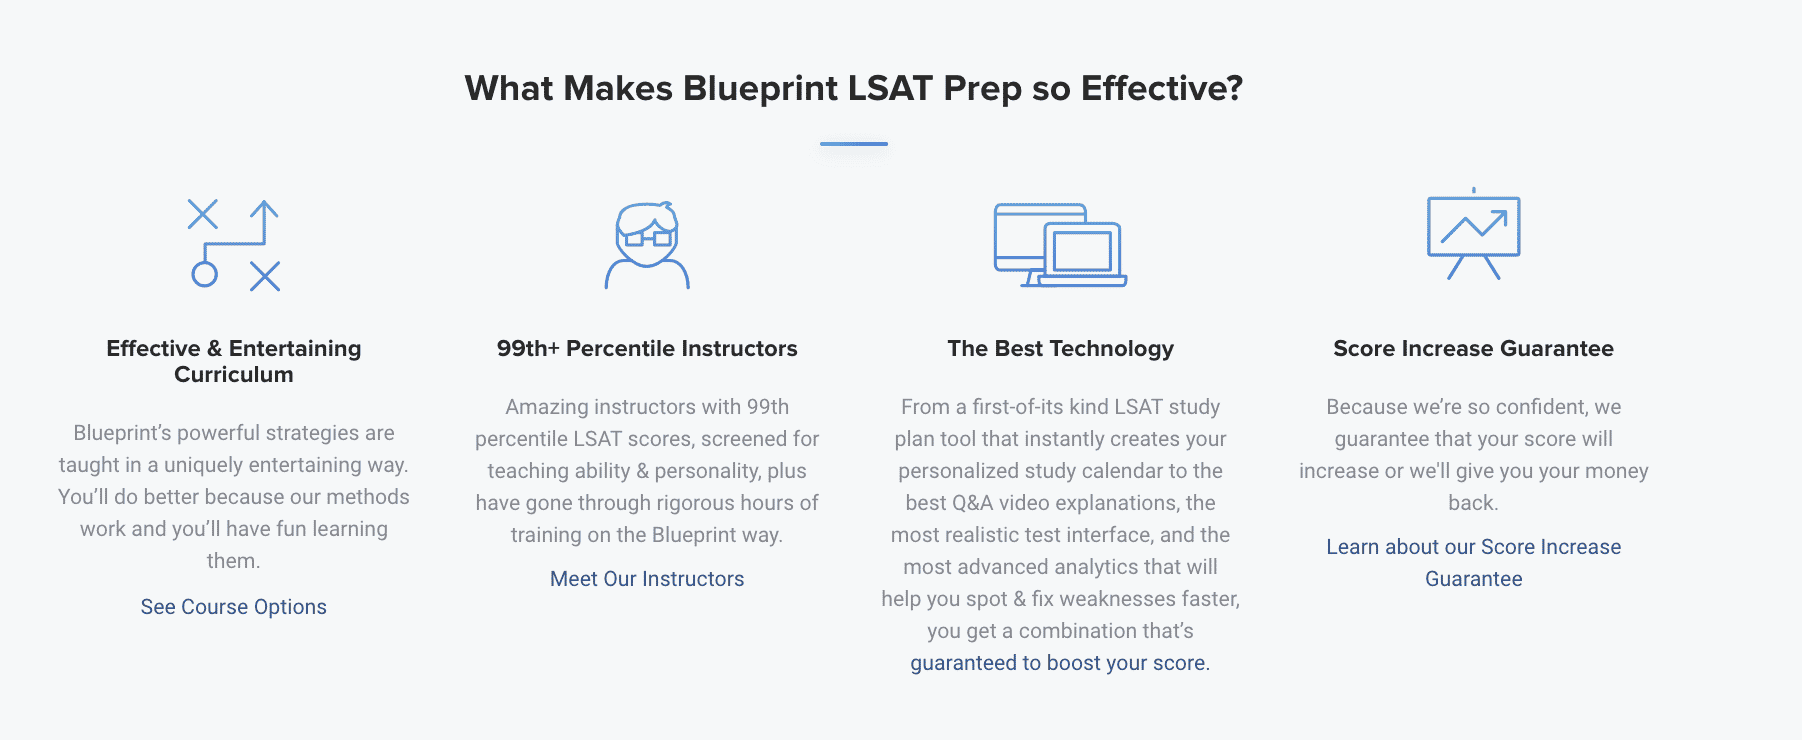 The Benefits of Blind Review on the LSAT